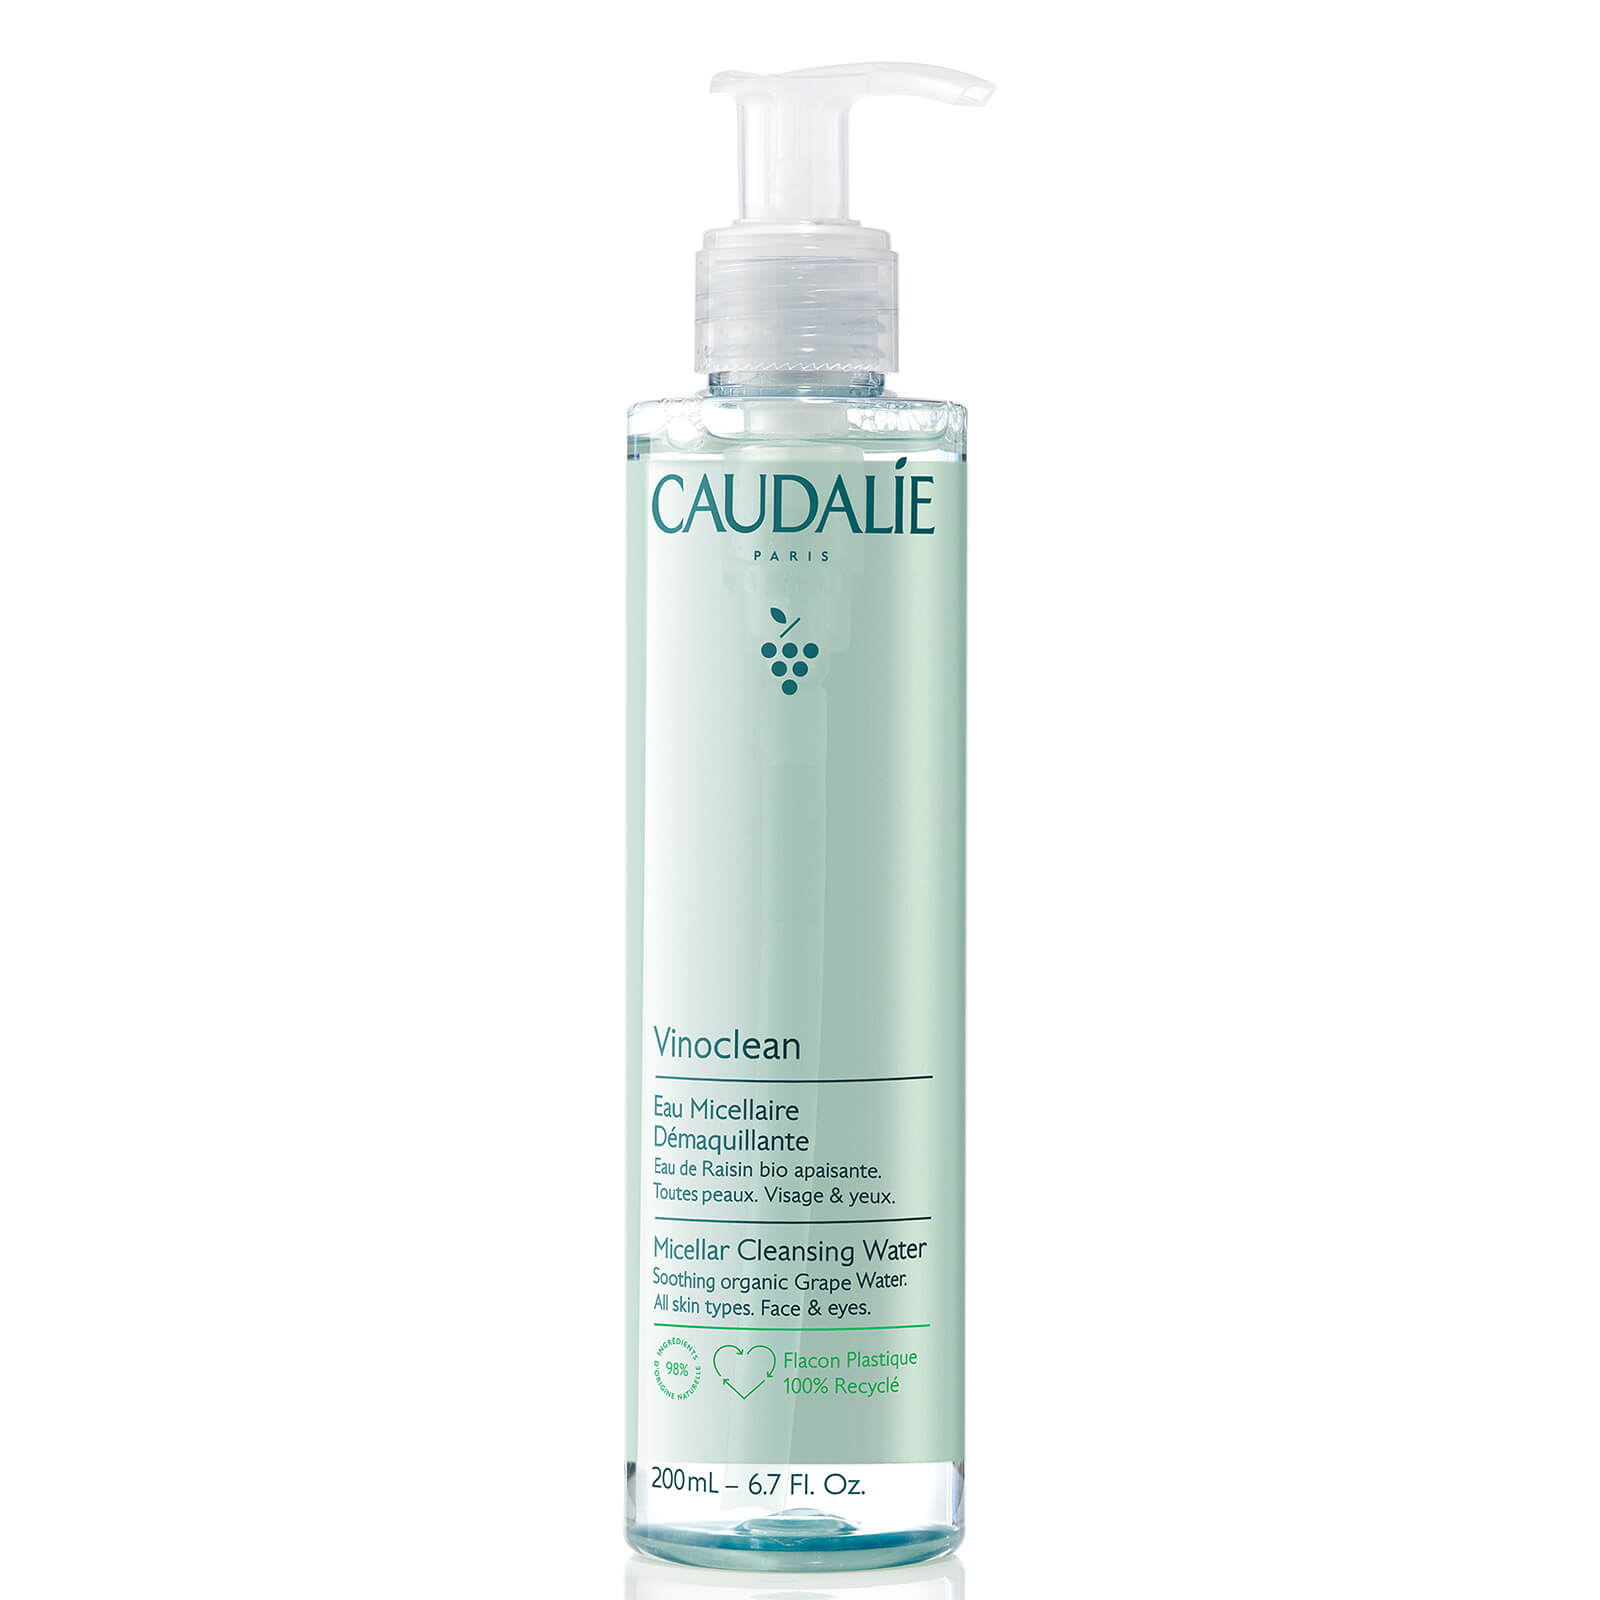 Photos - Facial / Body Cleansing Product Caudalie Vinoclean Micellar Cleansing Water 200ml 